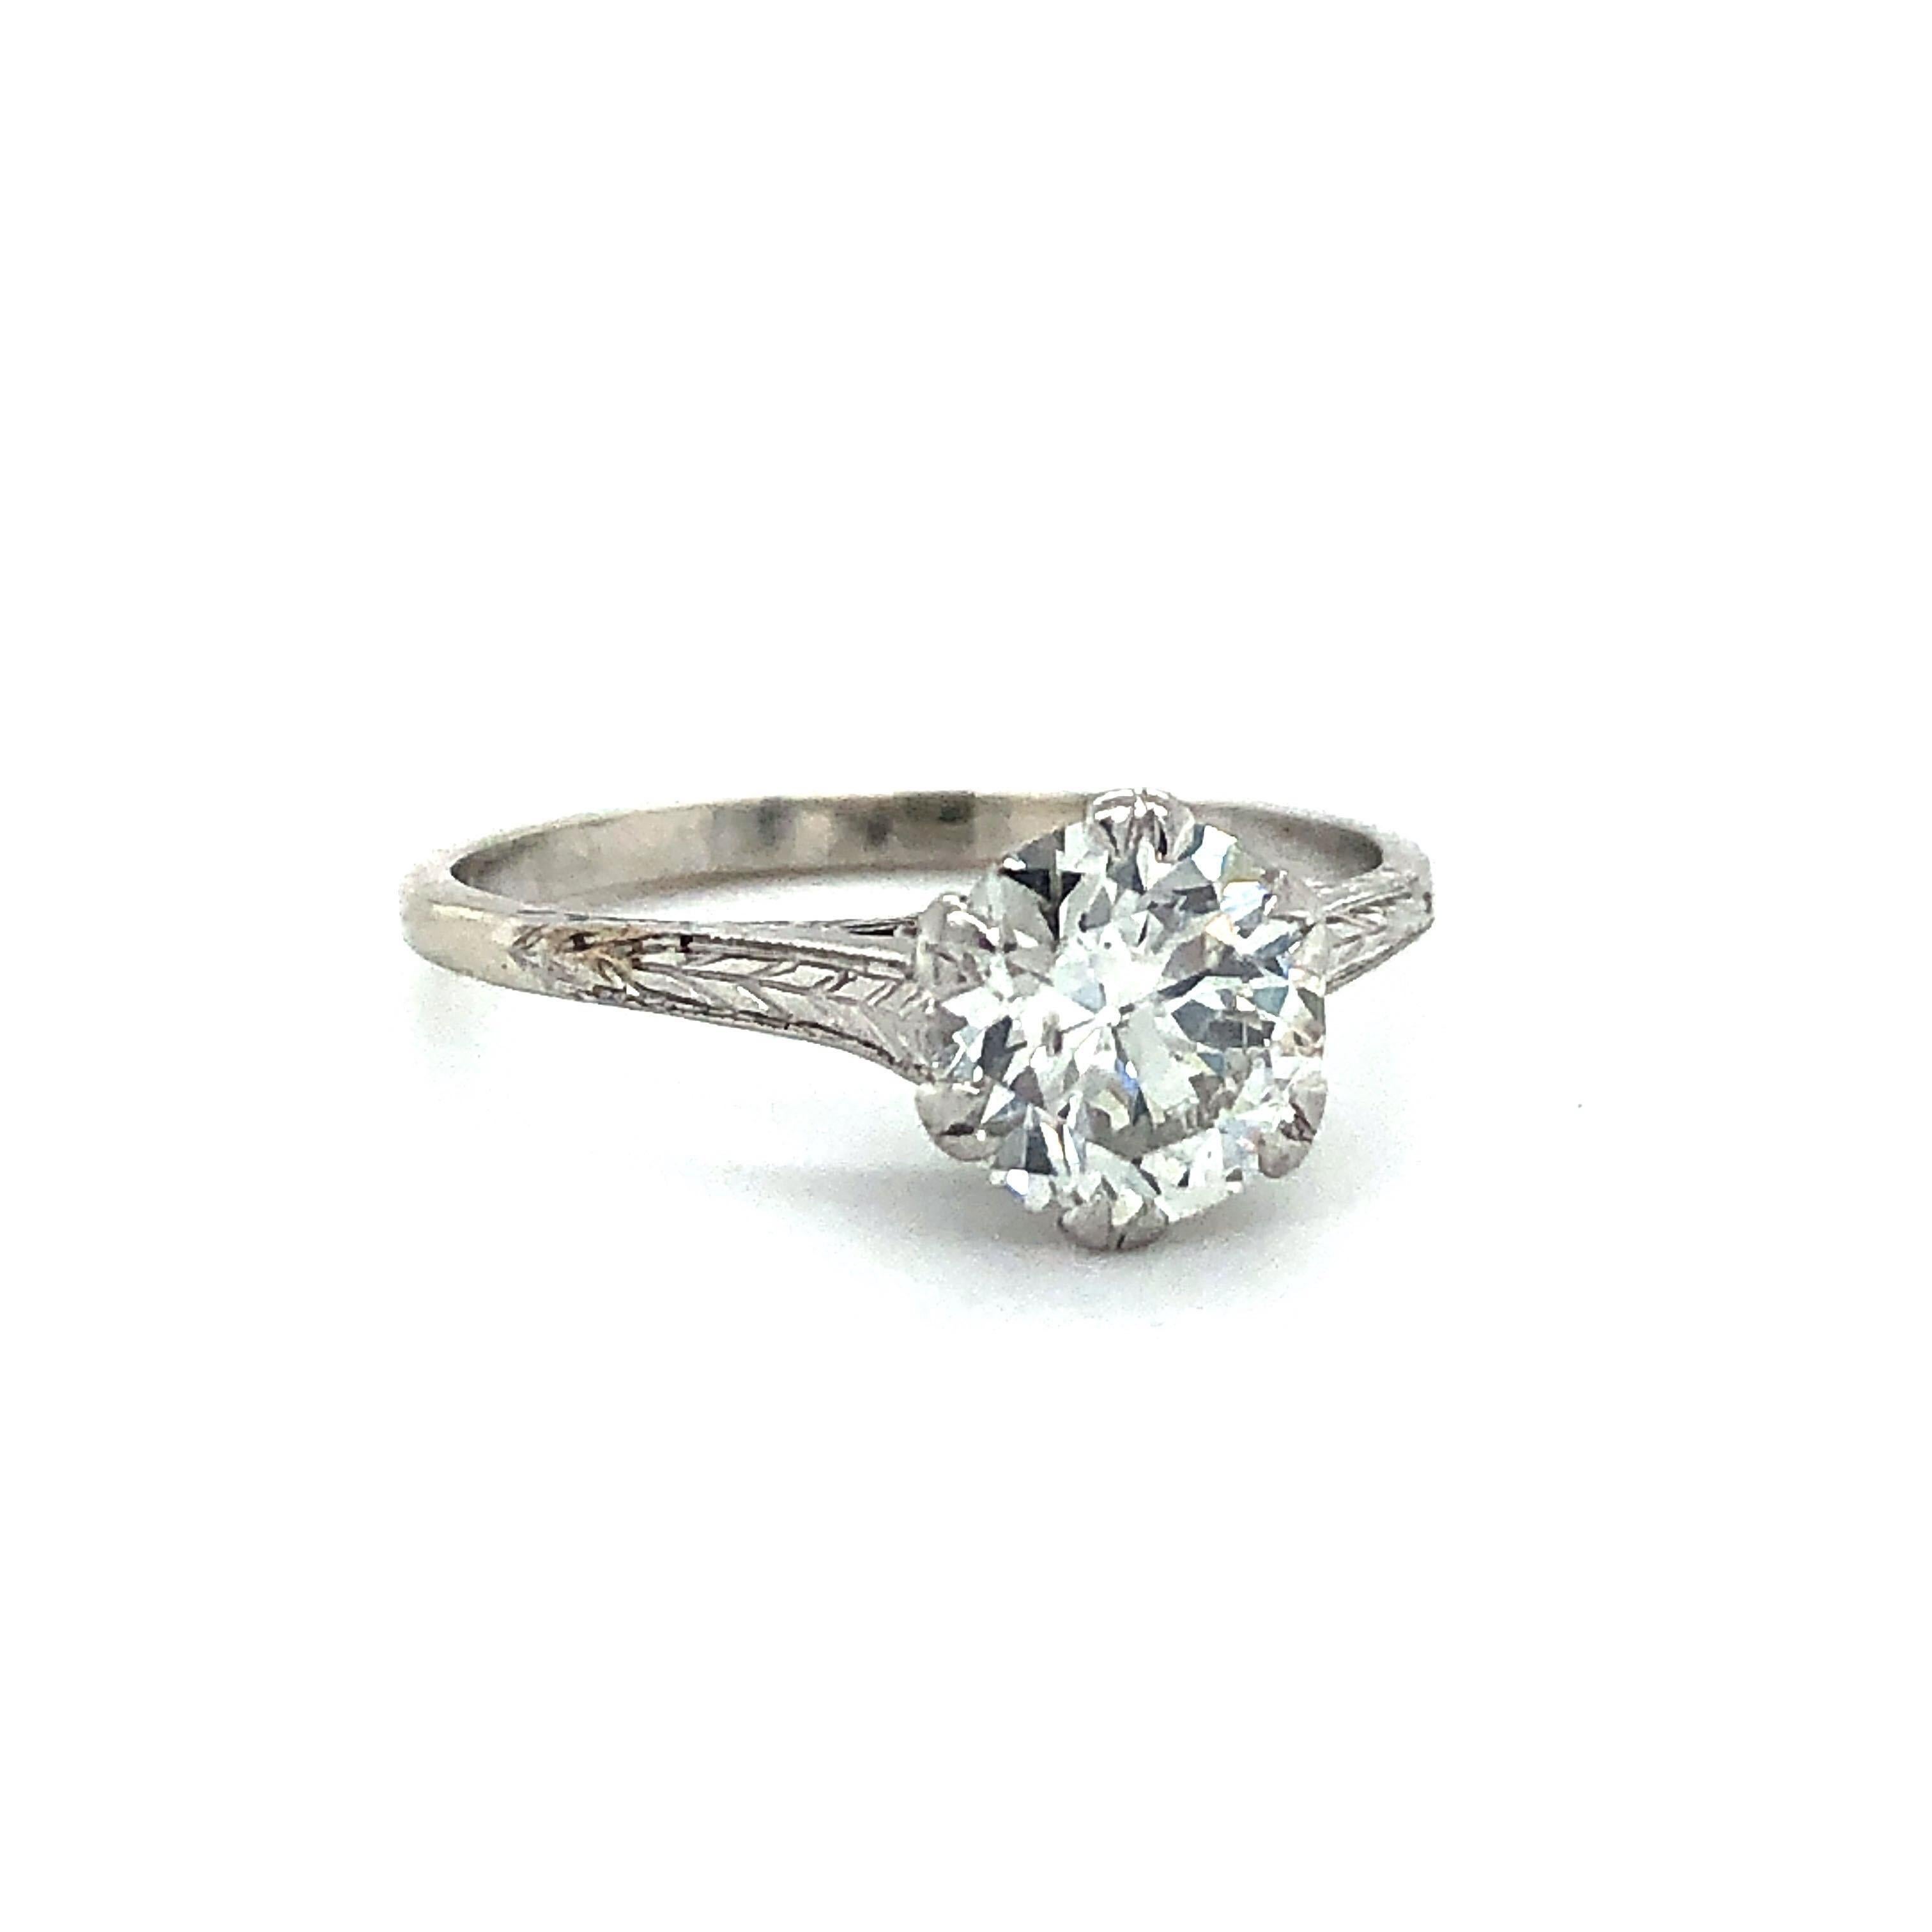 Vintage Art Deco 1.05ct European Cut Diamond Solitaire Ring 14k White Gold

Condition:  Excellent Condition, Professionally Cleaned and Polished
Metal:  14k Gold (Marked, and Professionally Tested)
Diamond:  Old European Cut Diamond 1.05ct
Diamond